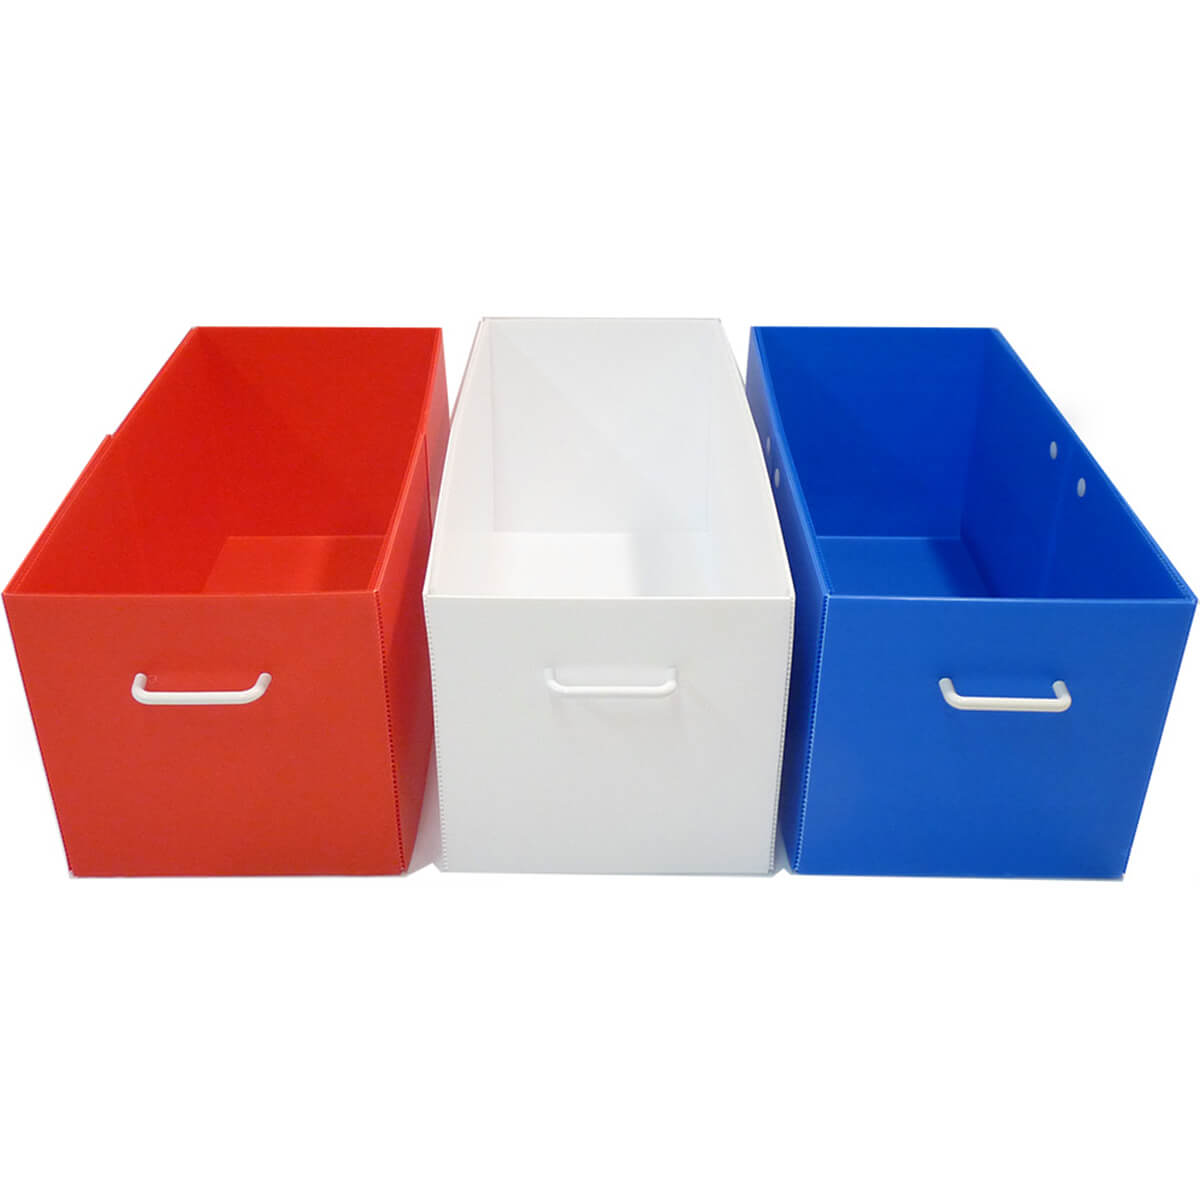 Bins for Small Cage - red, white and blue